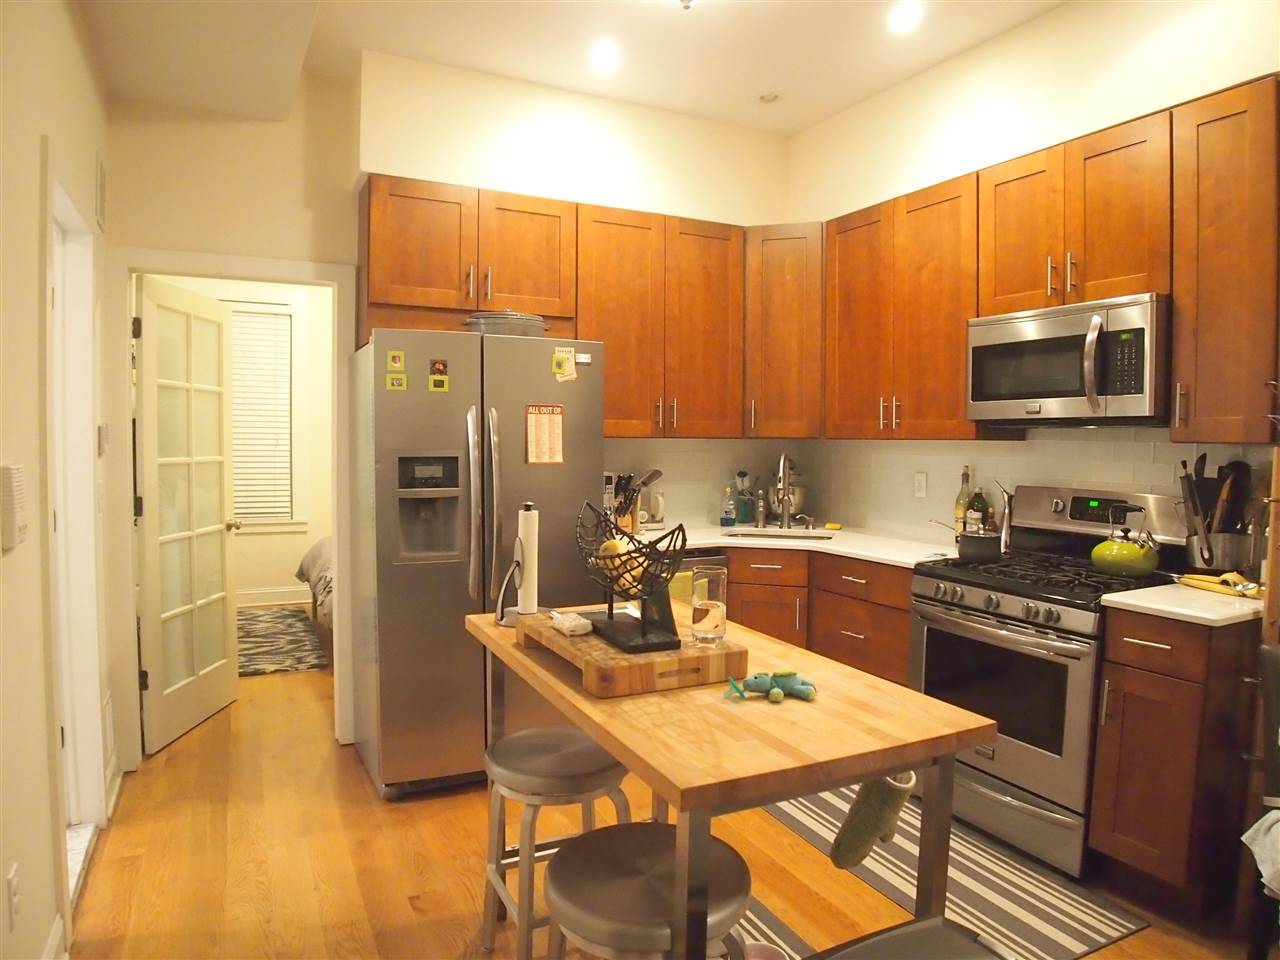 Located on 6th and Bloomfield St on the second floor of a beautifully remastered brownstone